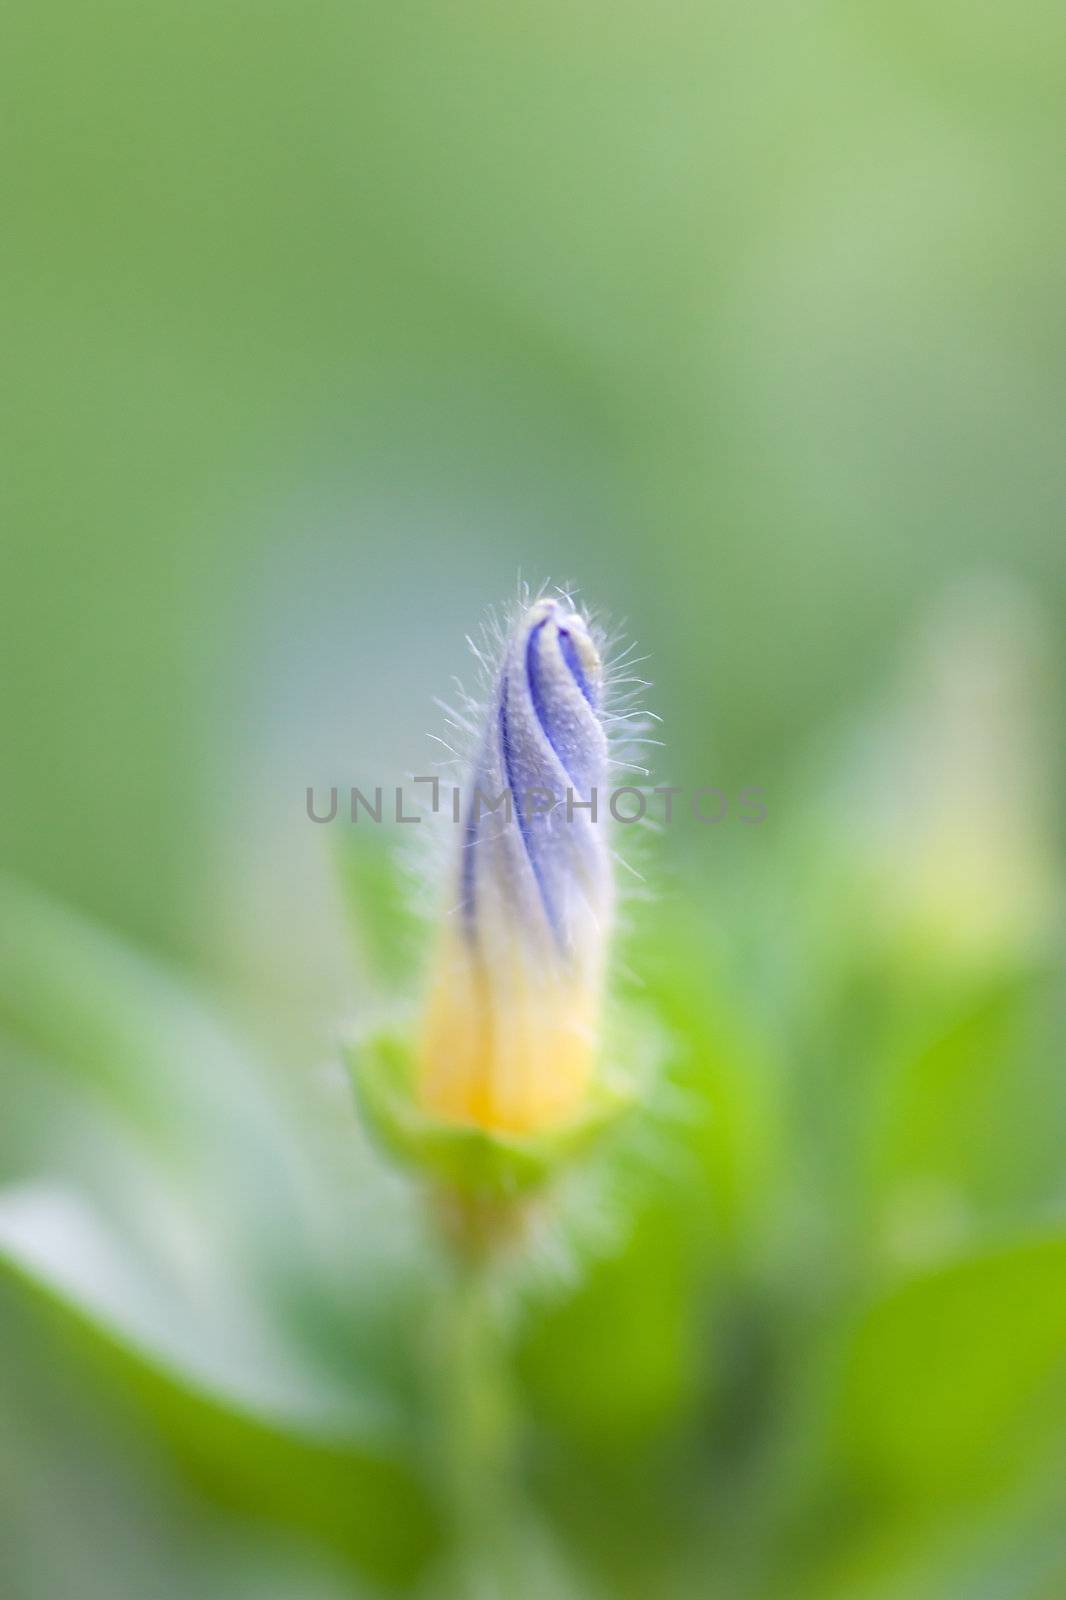 Tender blue flower with closed bud over green backgroung